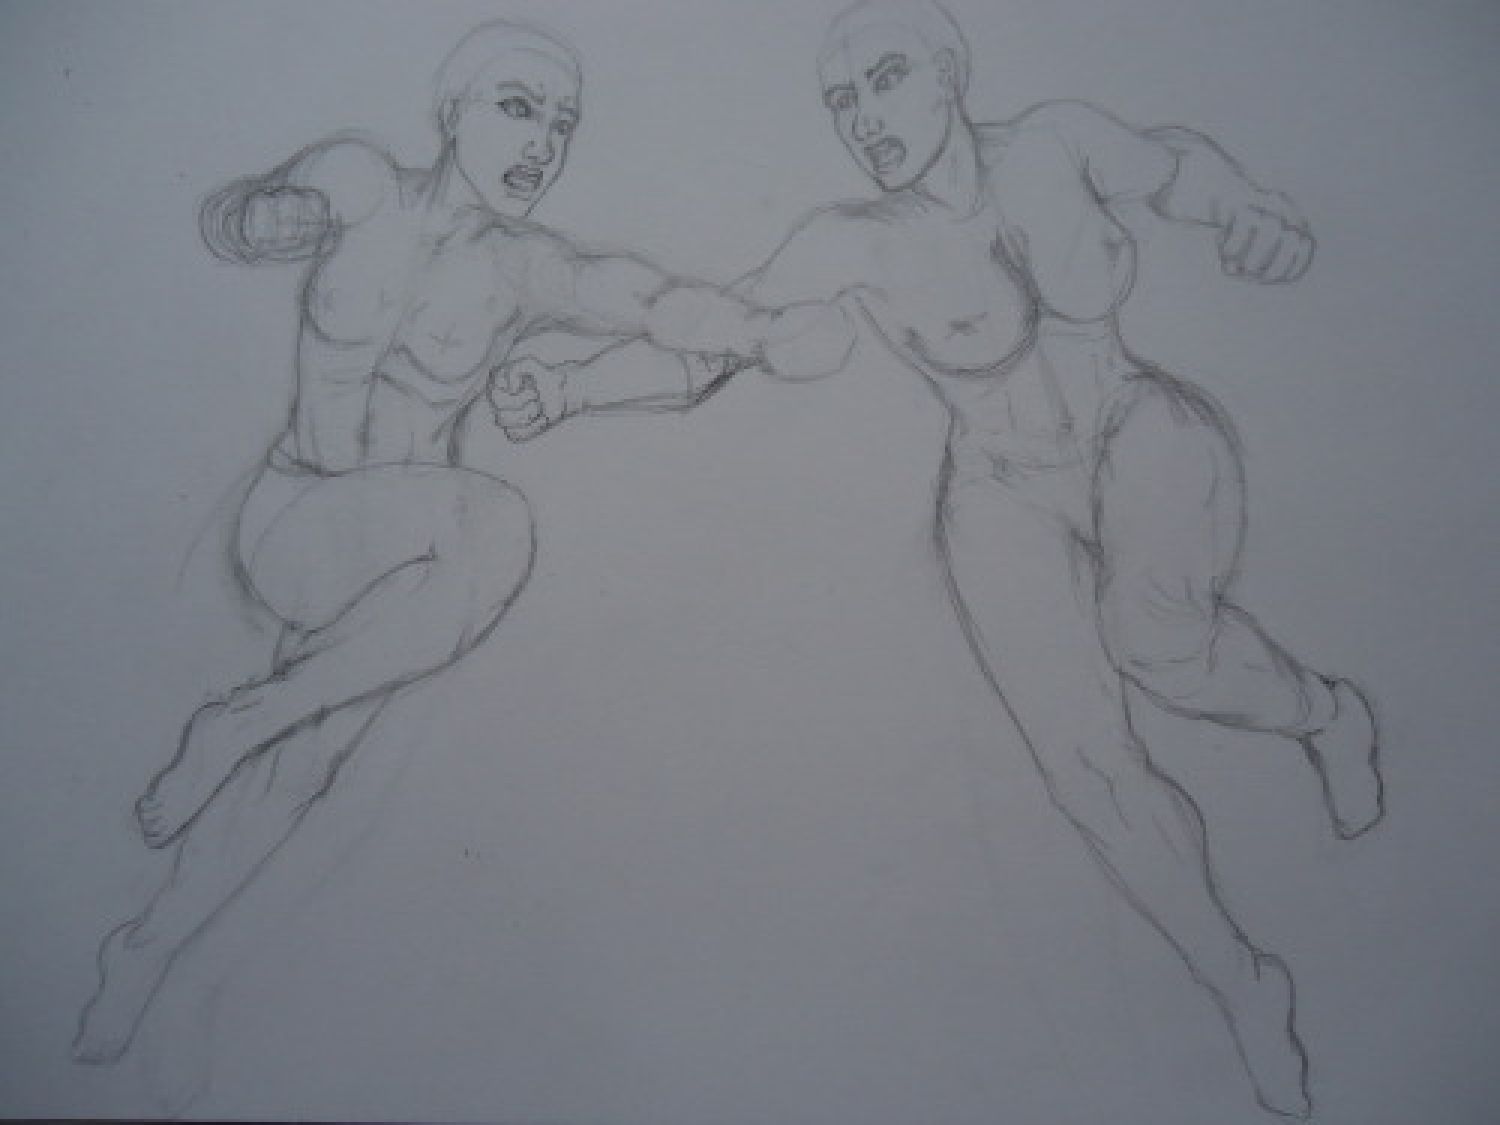 pencil outline of the supergirl powergirl fight redraw by TheDreadVampy on Tumblr depicting the non-clothed character models of Supergirl and Powergirl flying at each other and punching